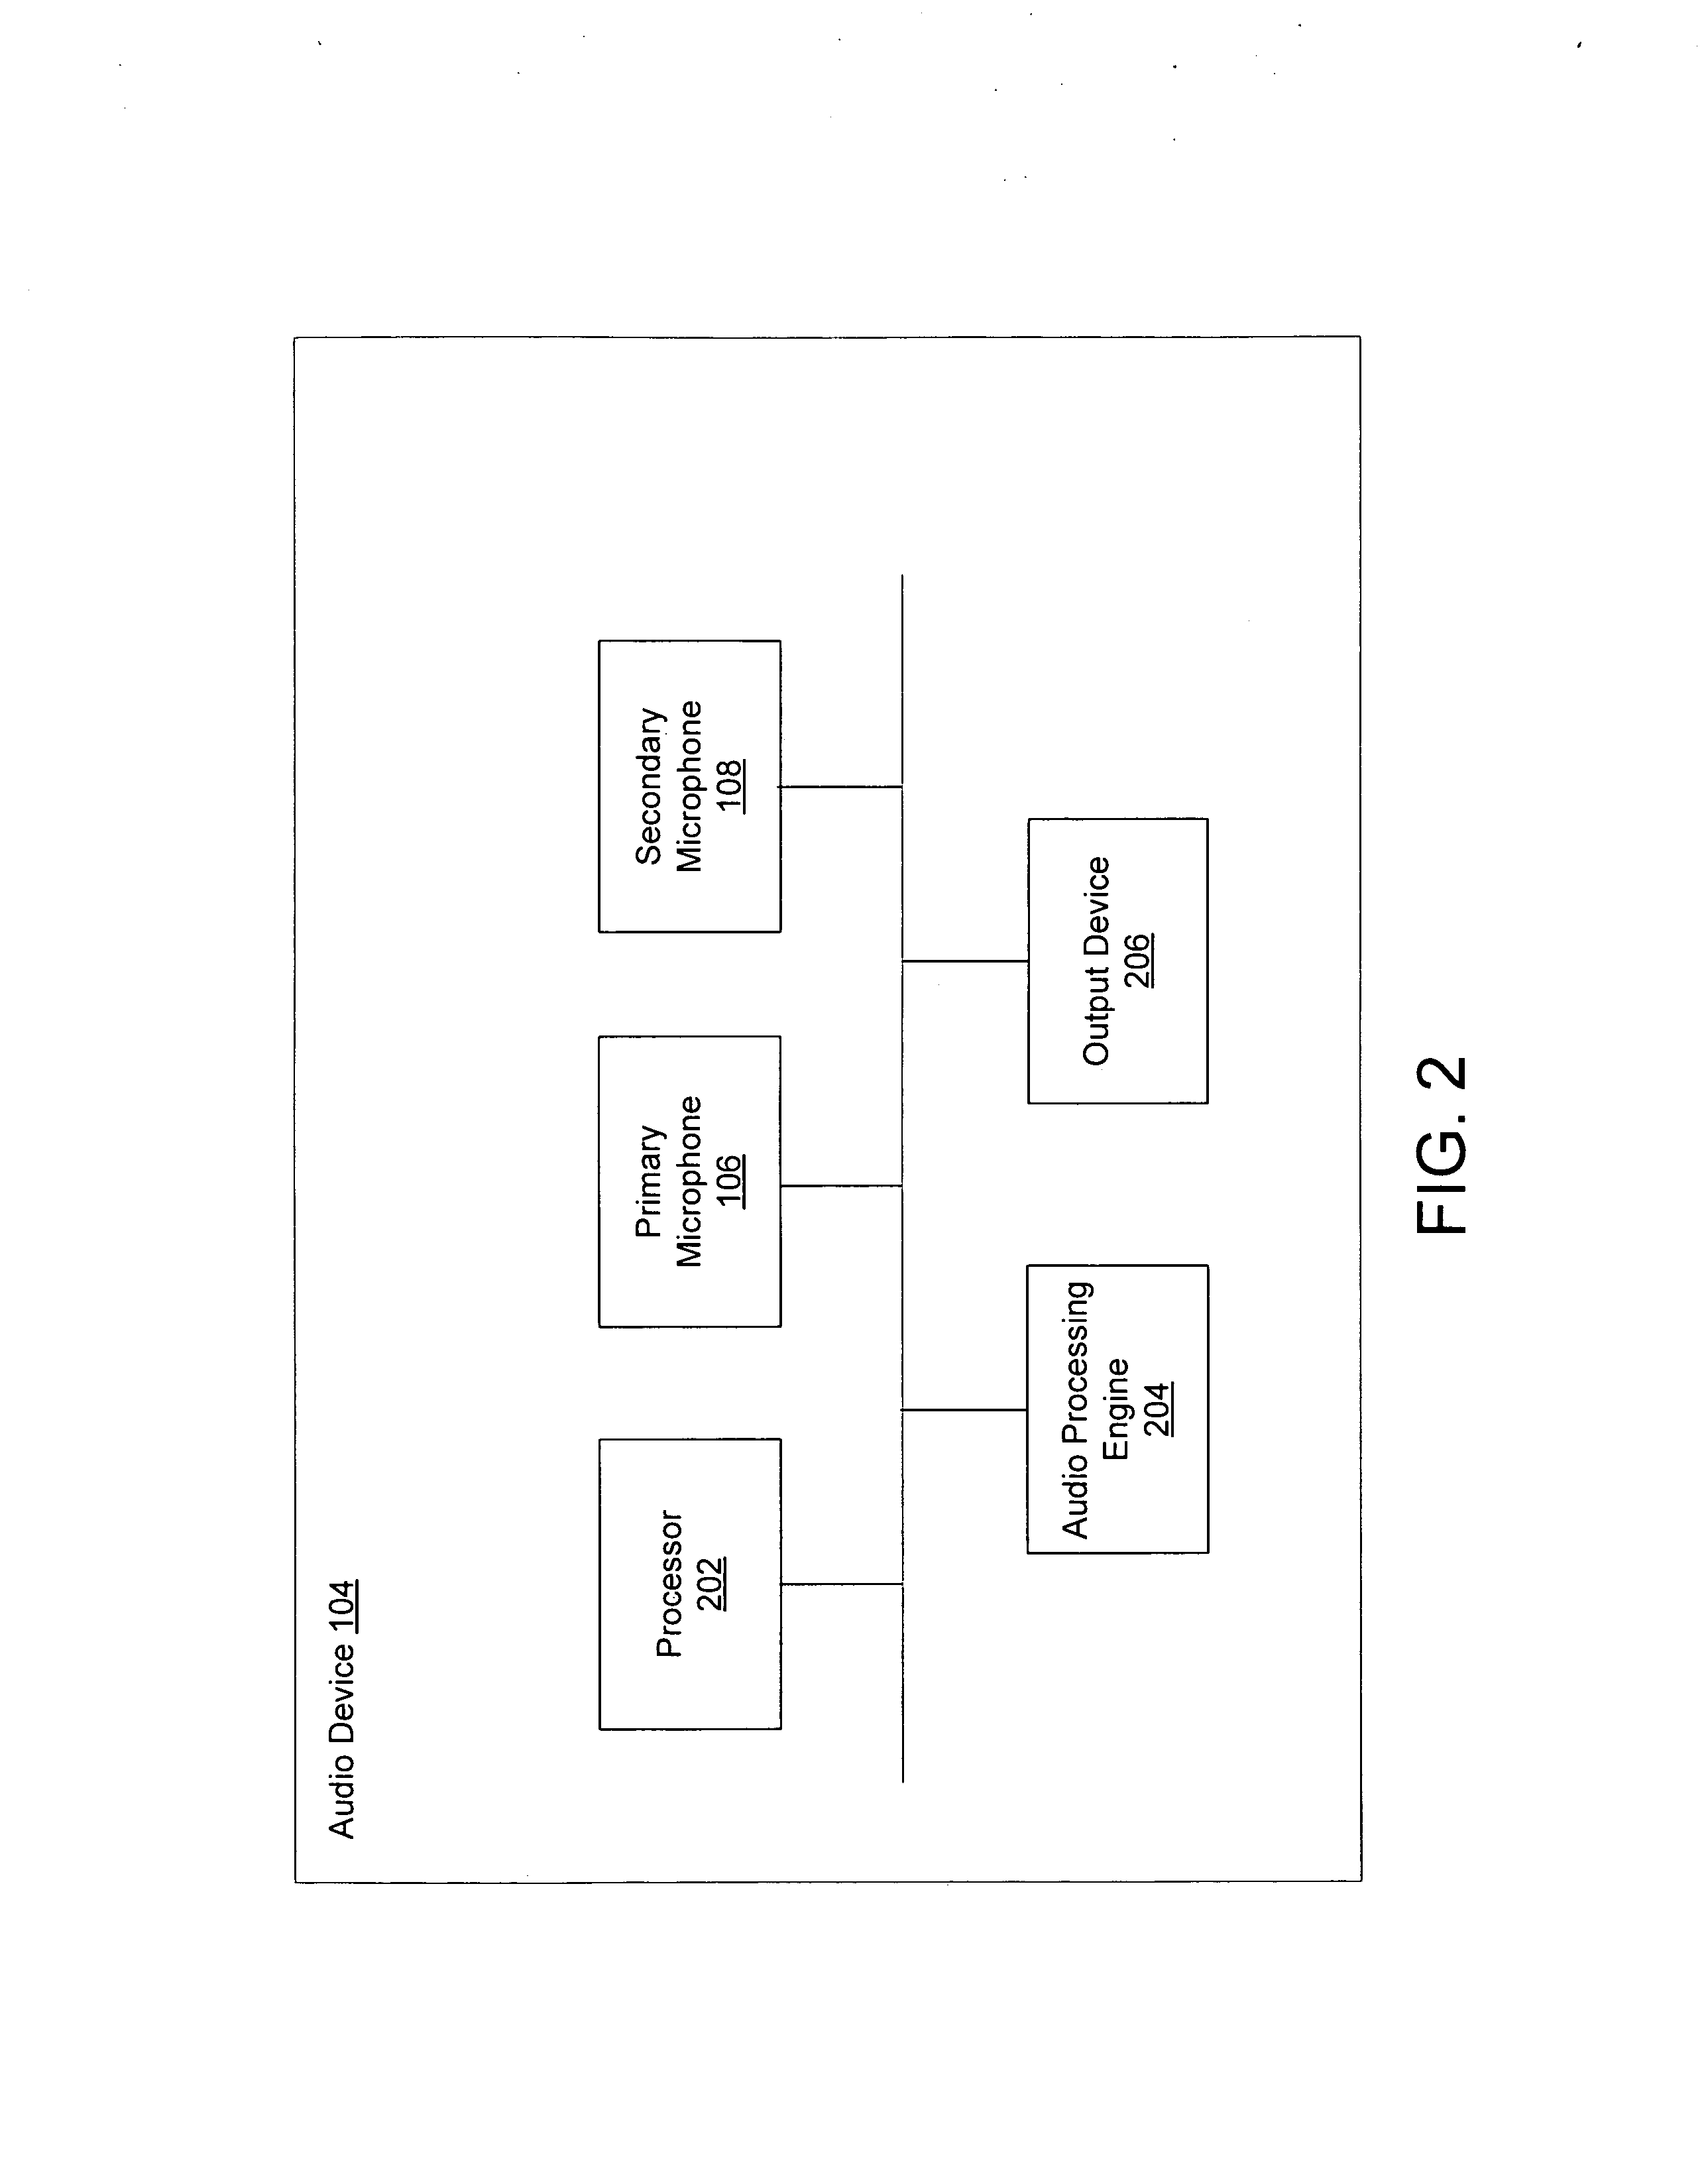 System and method for providing close microphone adaptive array processing